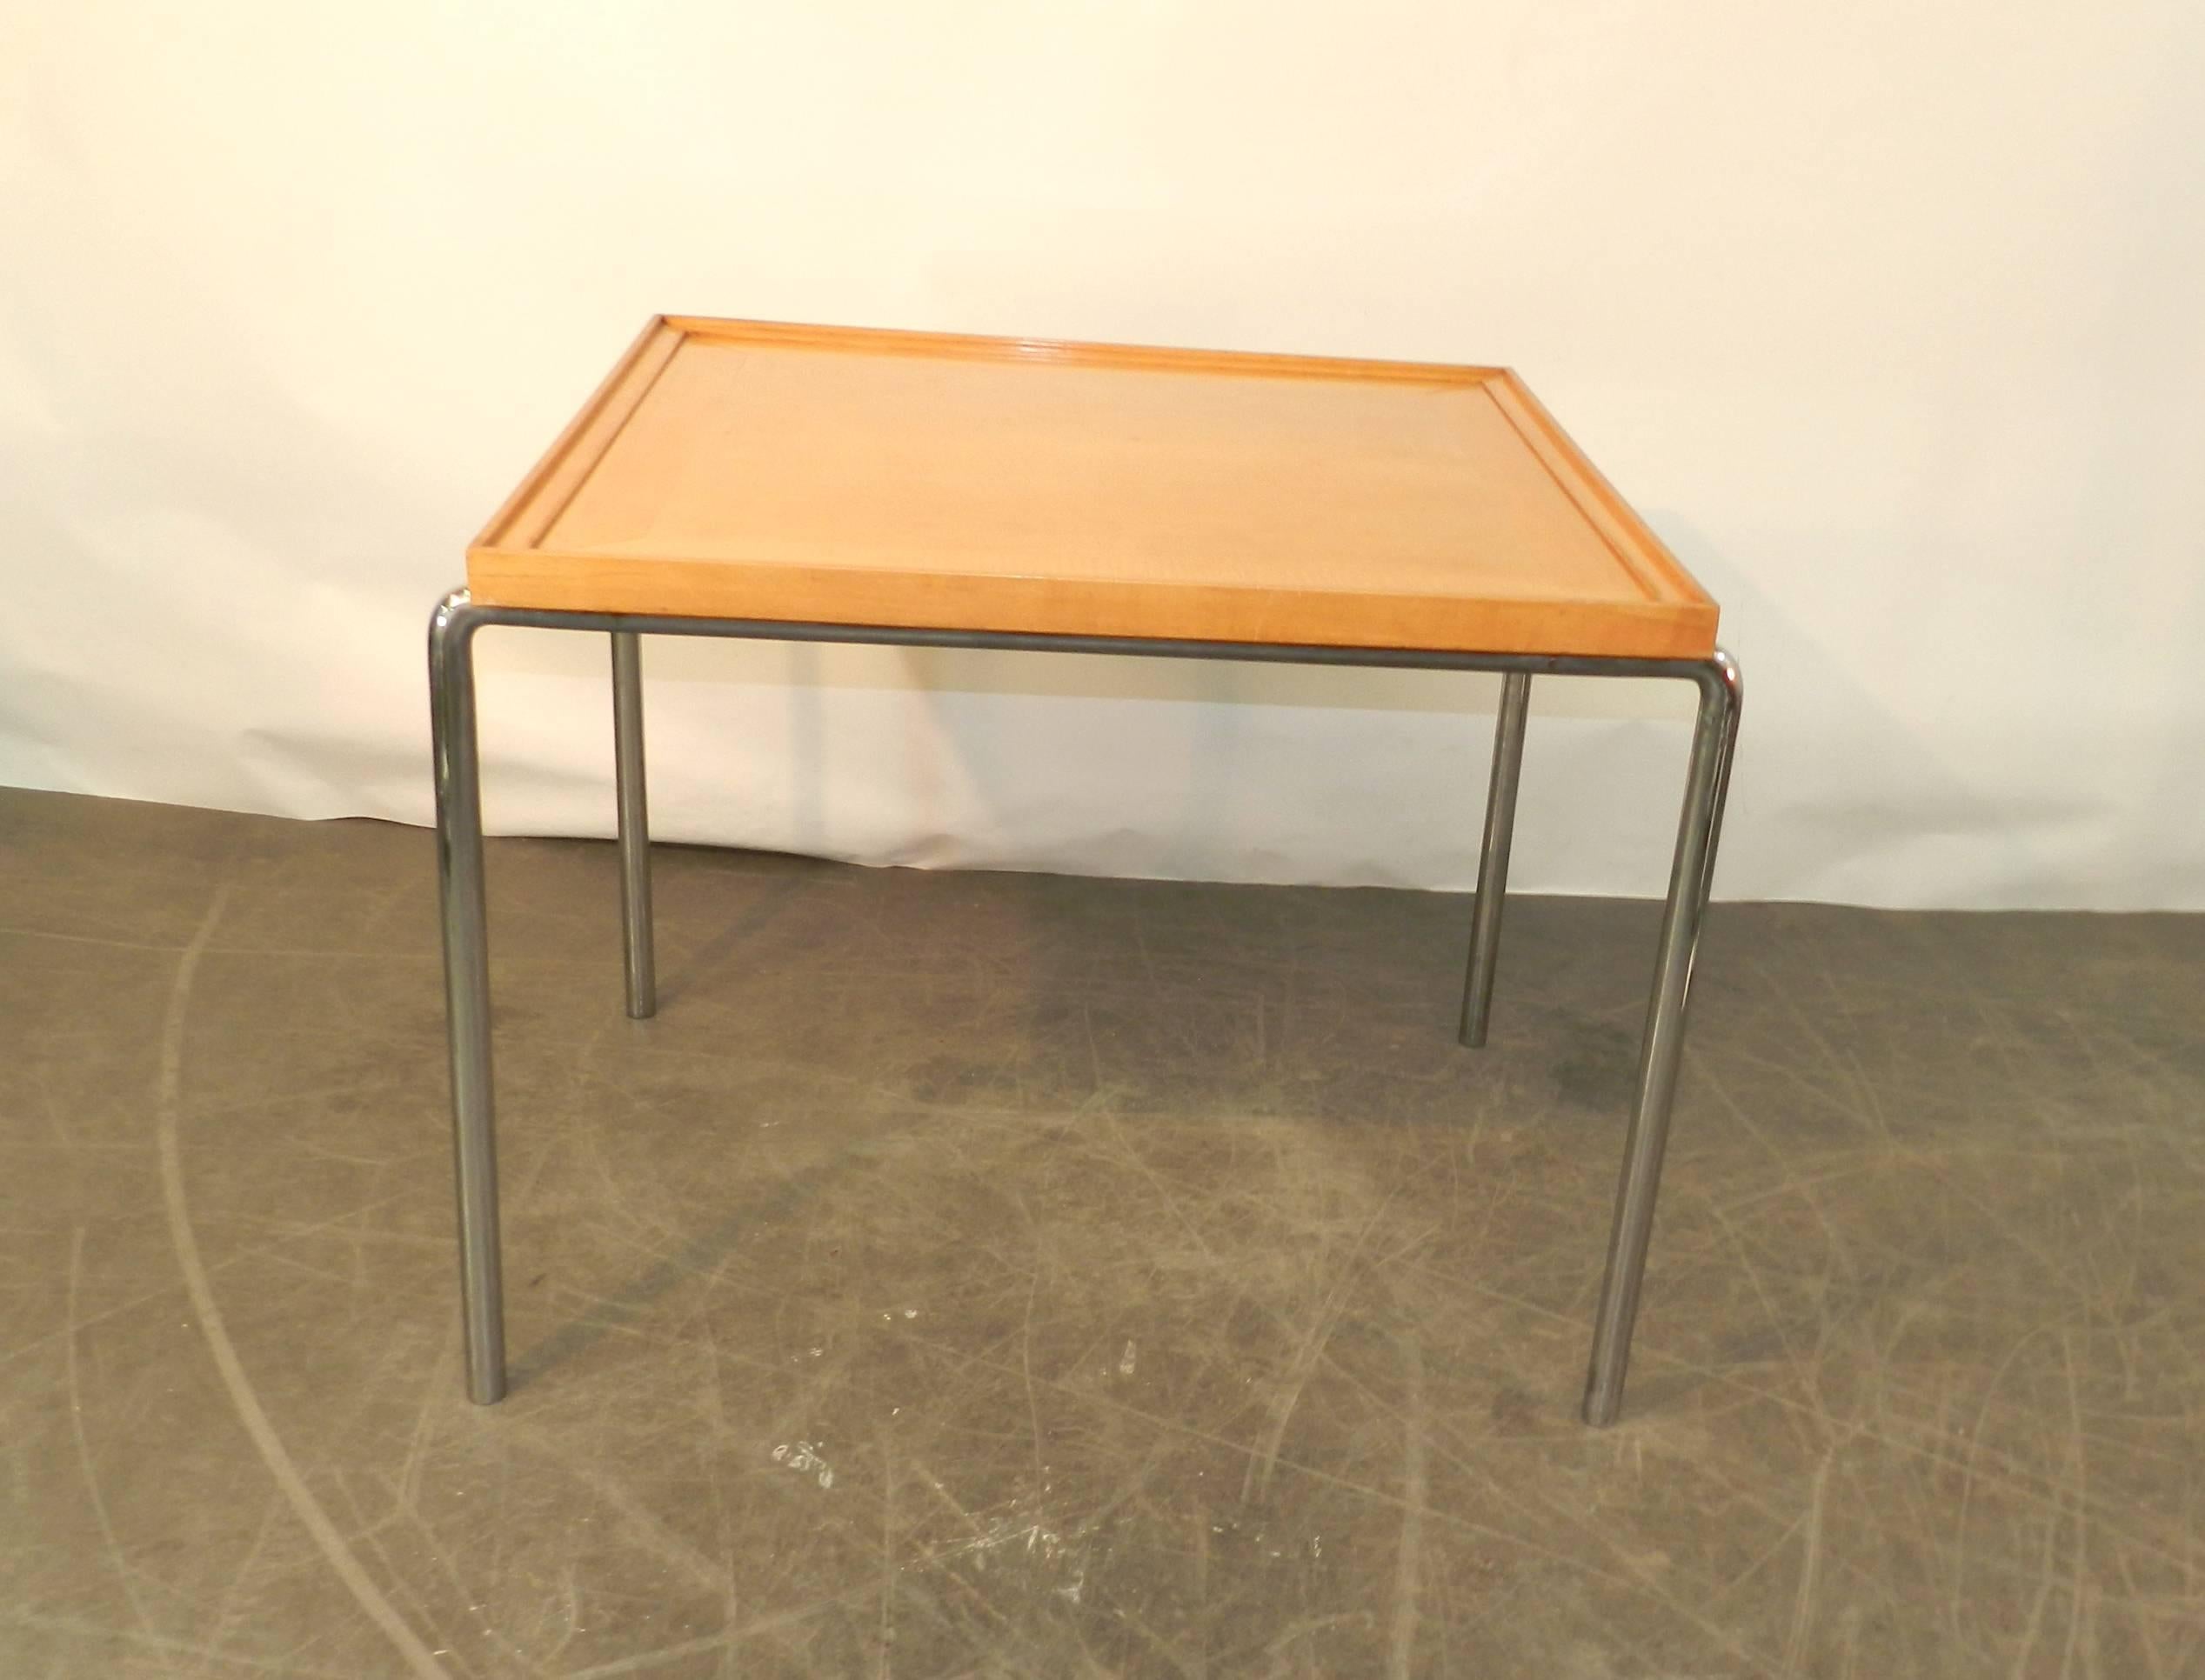 Modernist Art Deco games table in sycamore and chrome. circa 1930/1930